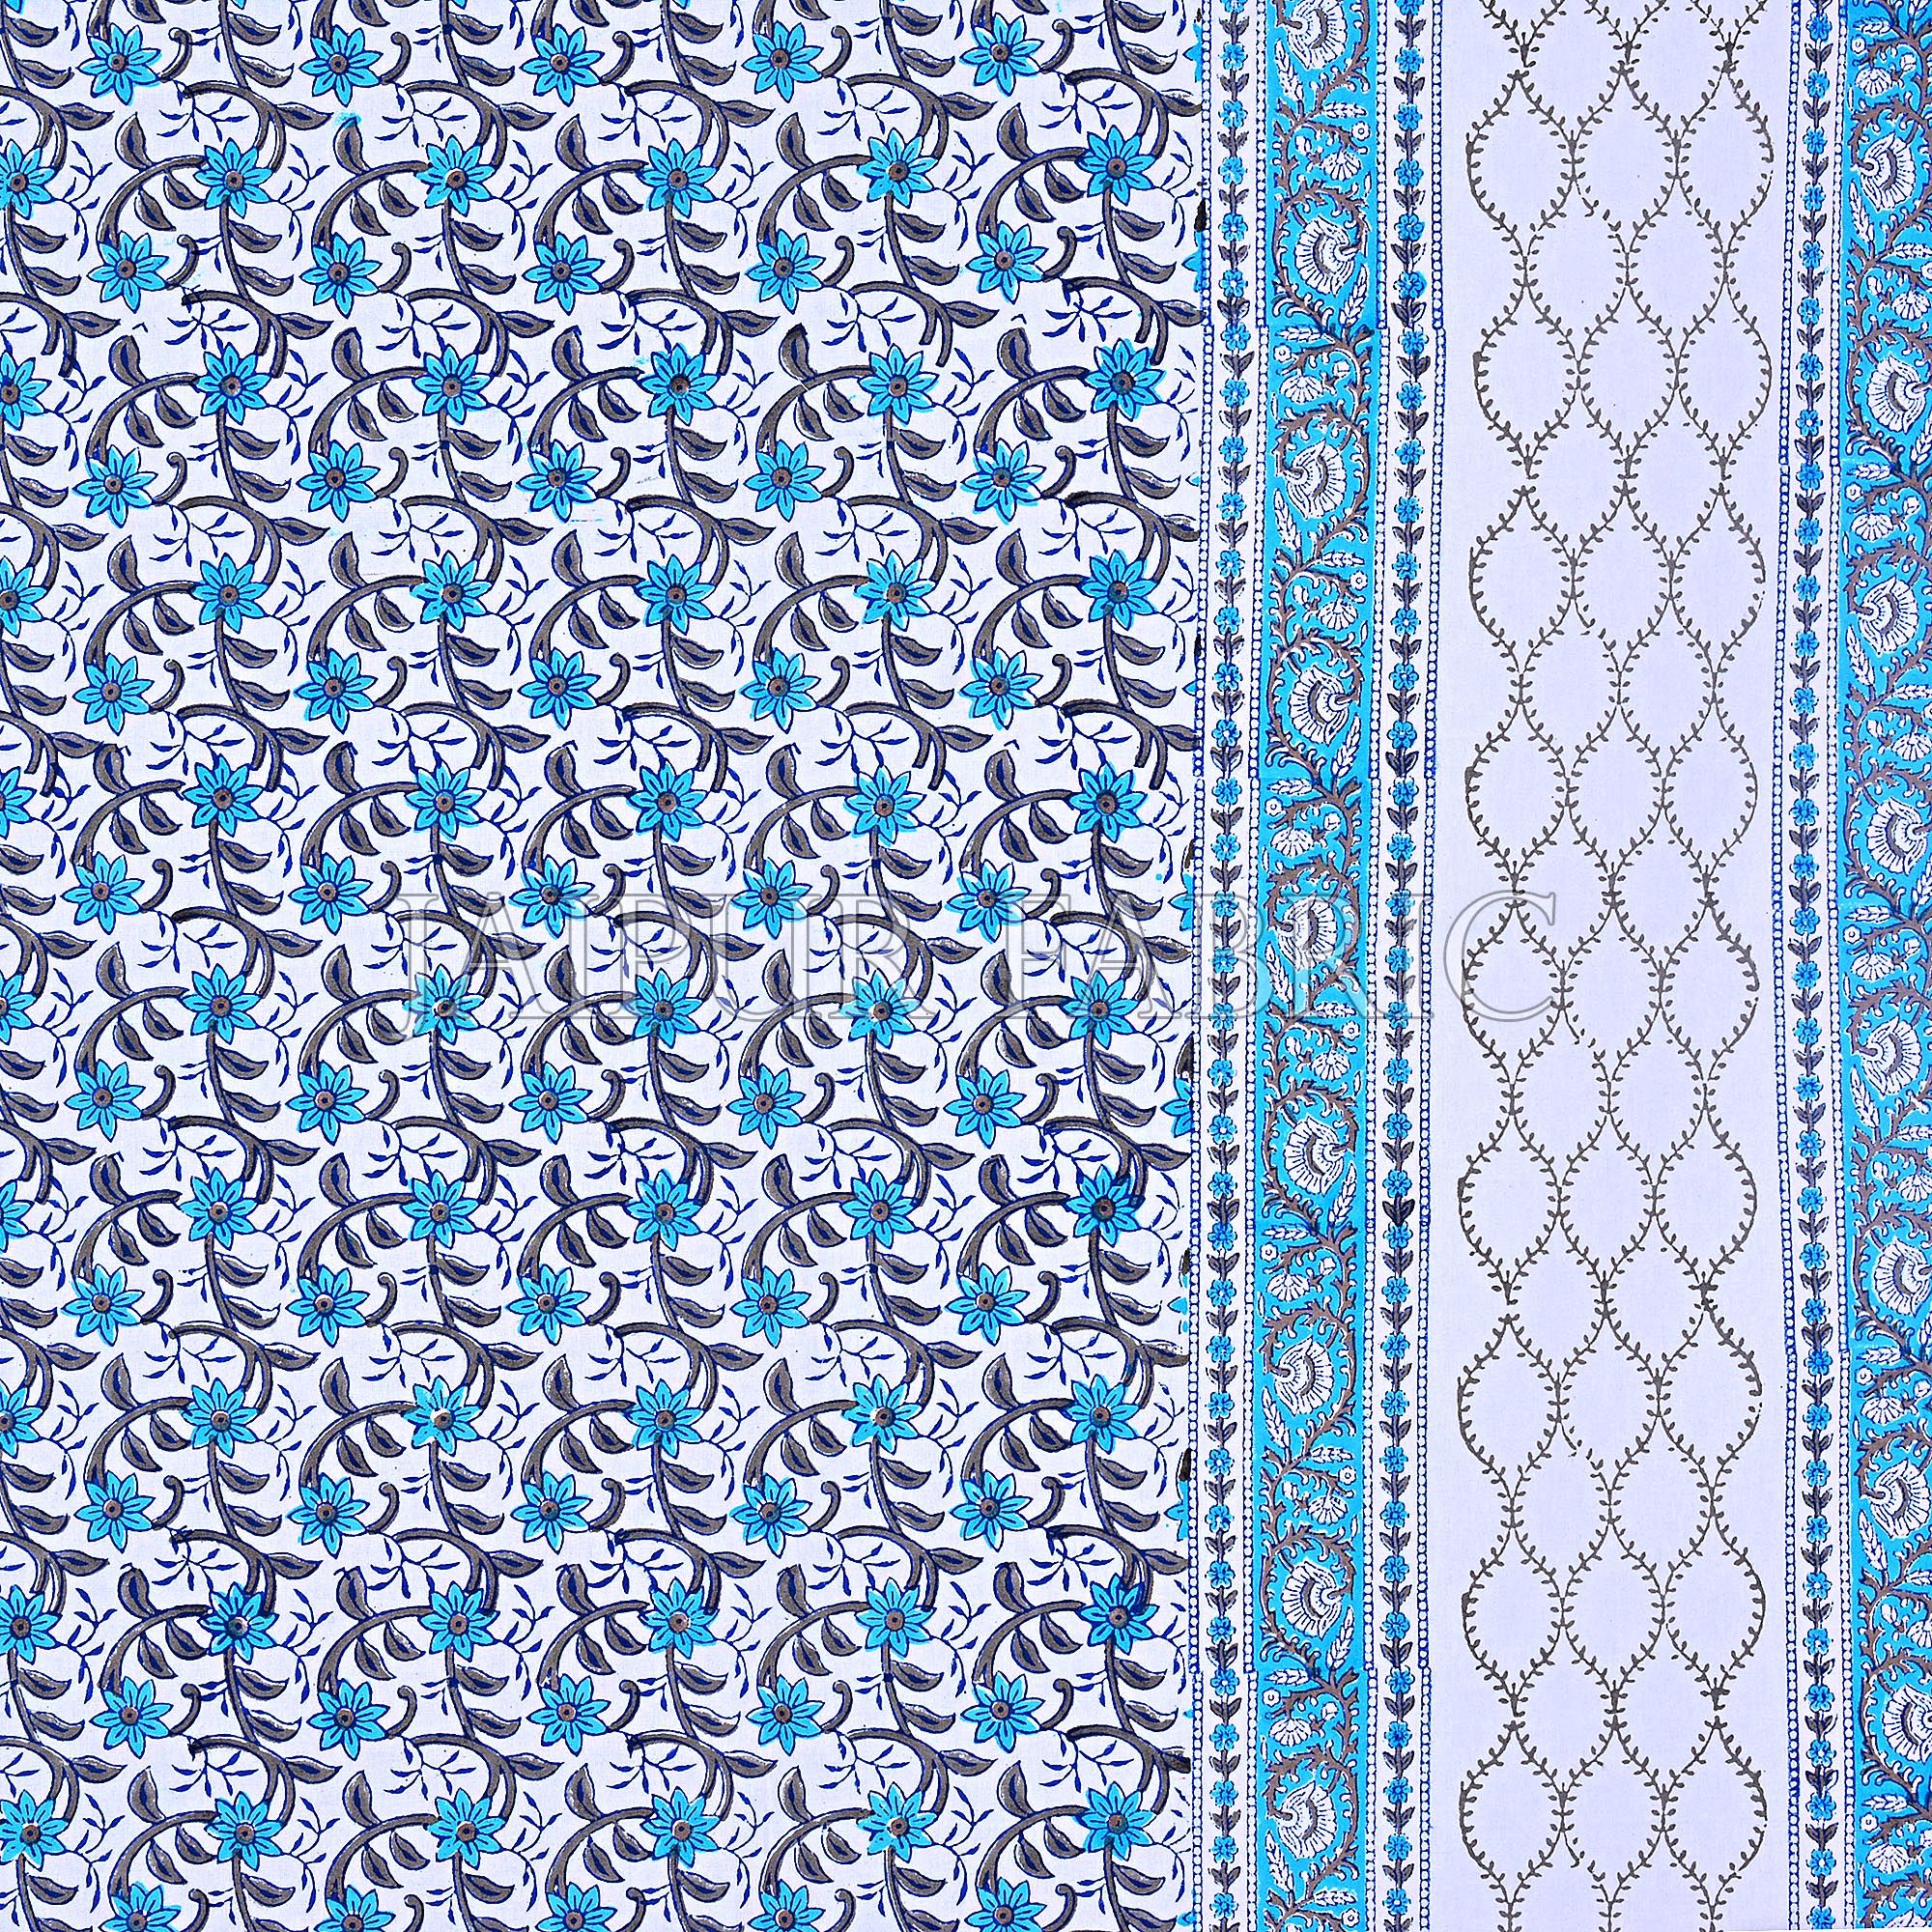 White Base White Blue Border Small Blue Flower With Black Leaf Pattern Hand Block Print Super Fine Cotton Double Bed Sheet